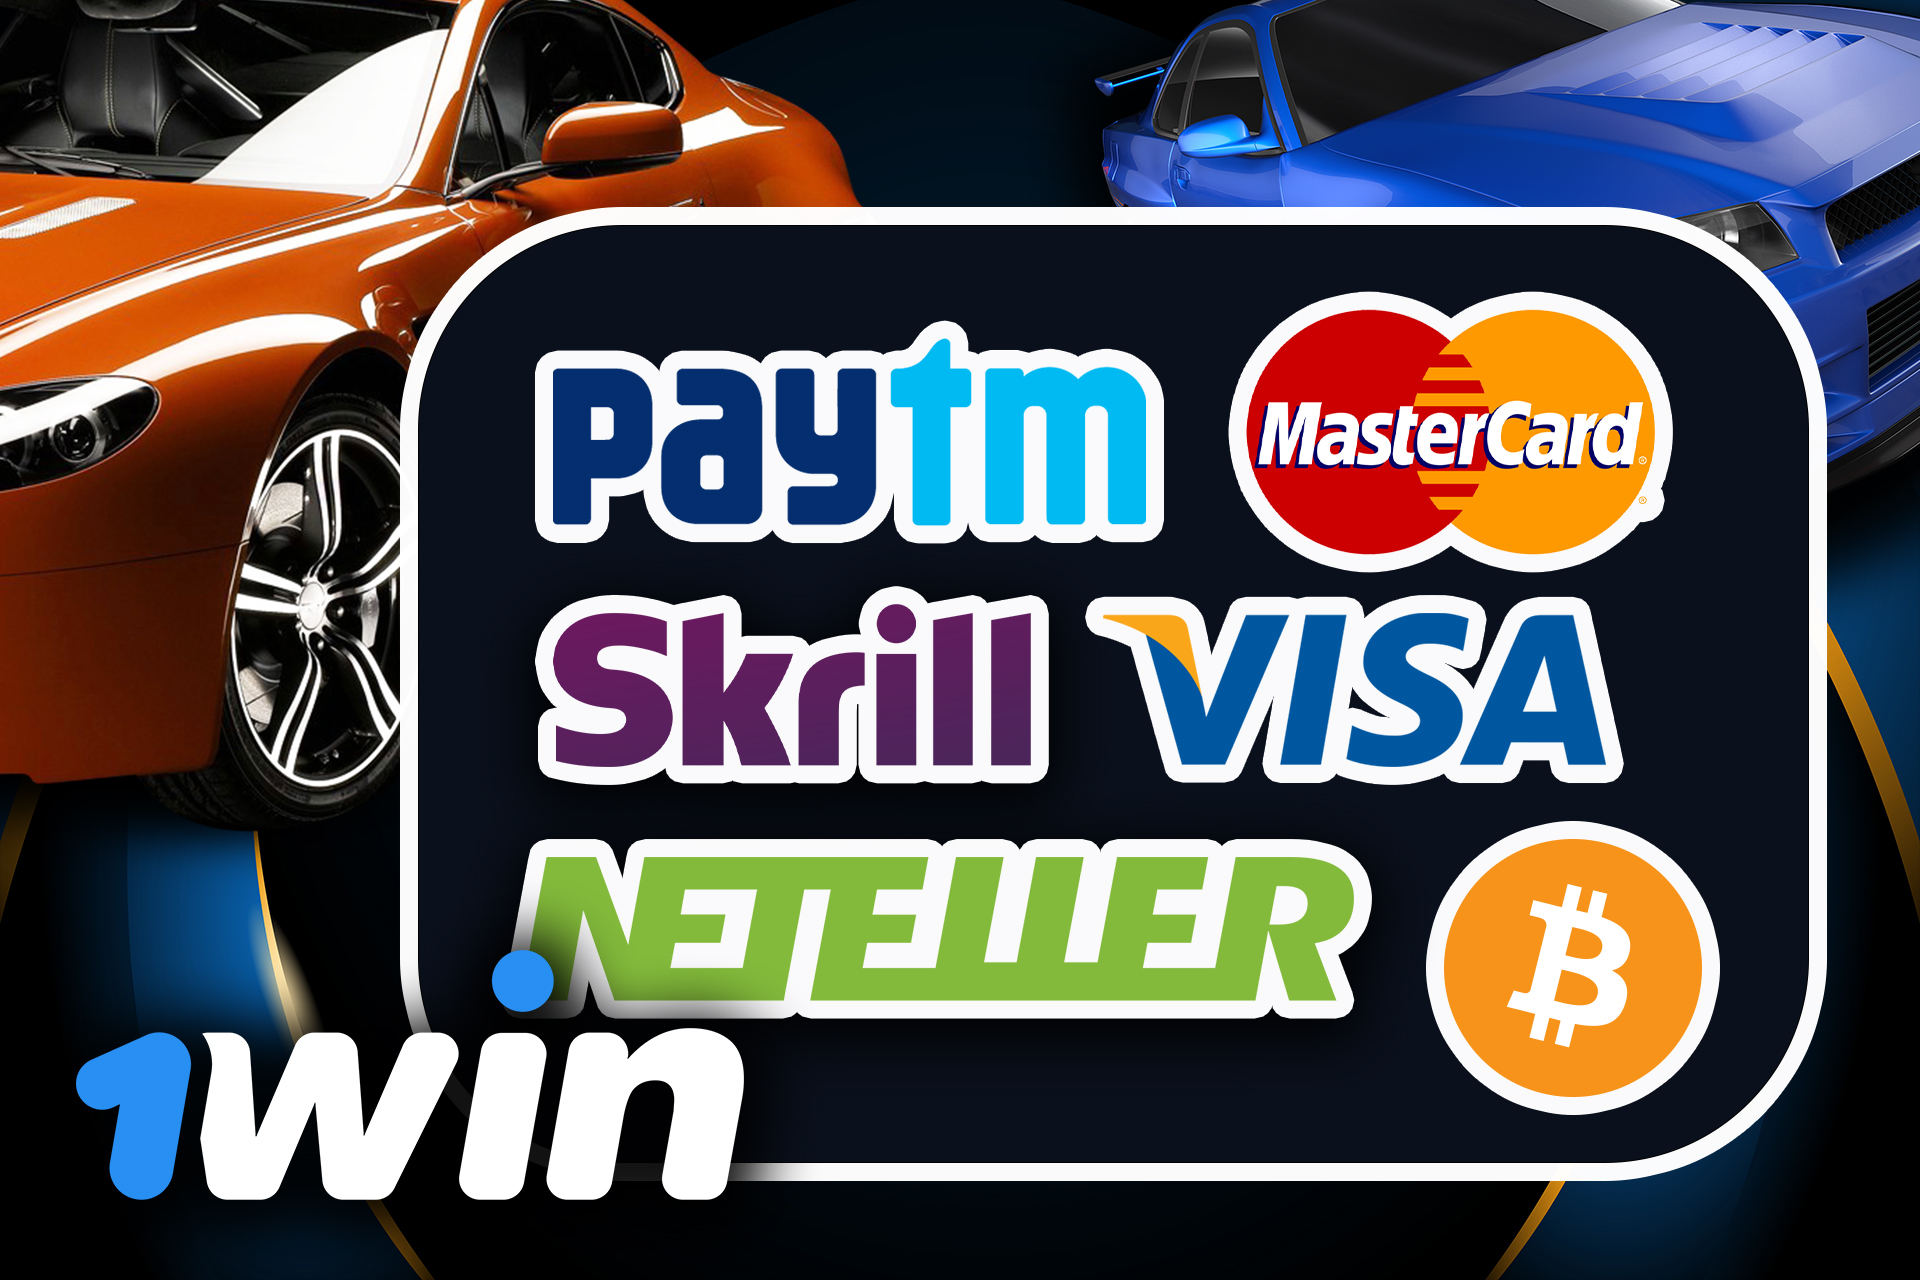 There are various payment methods to deposit and withdraw money on 1win.